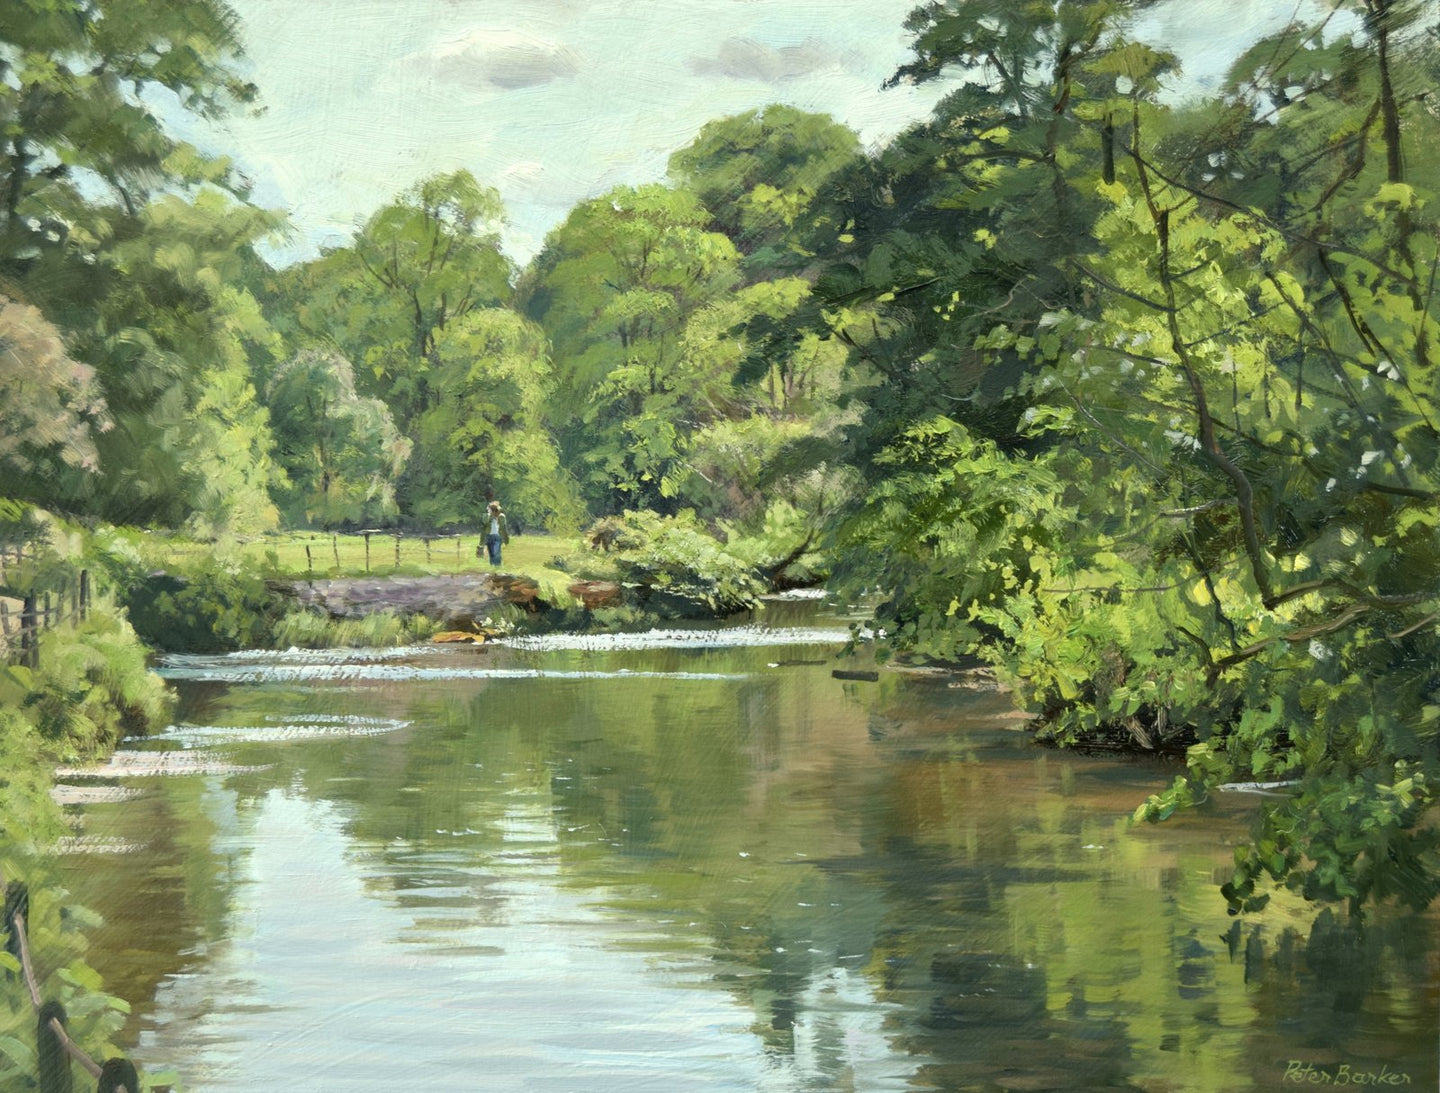 A 9 x 12 inch oil painting of the River Derwent at Ilam Park, with lots of trees in full Spring green leaf, trees in the right foreground and lots of reflections in the clear water, and a single figure walking towards us in the filed in the middle distance.